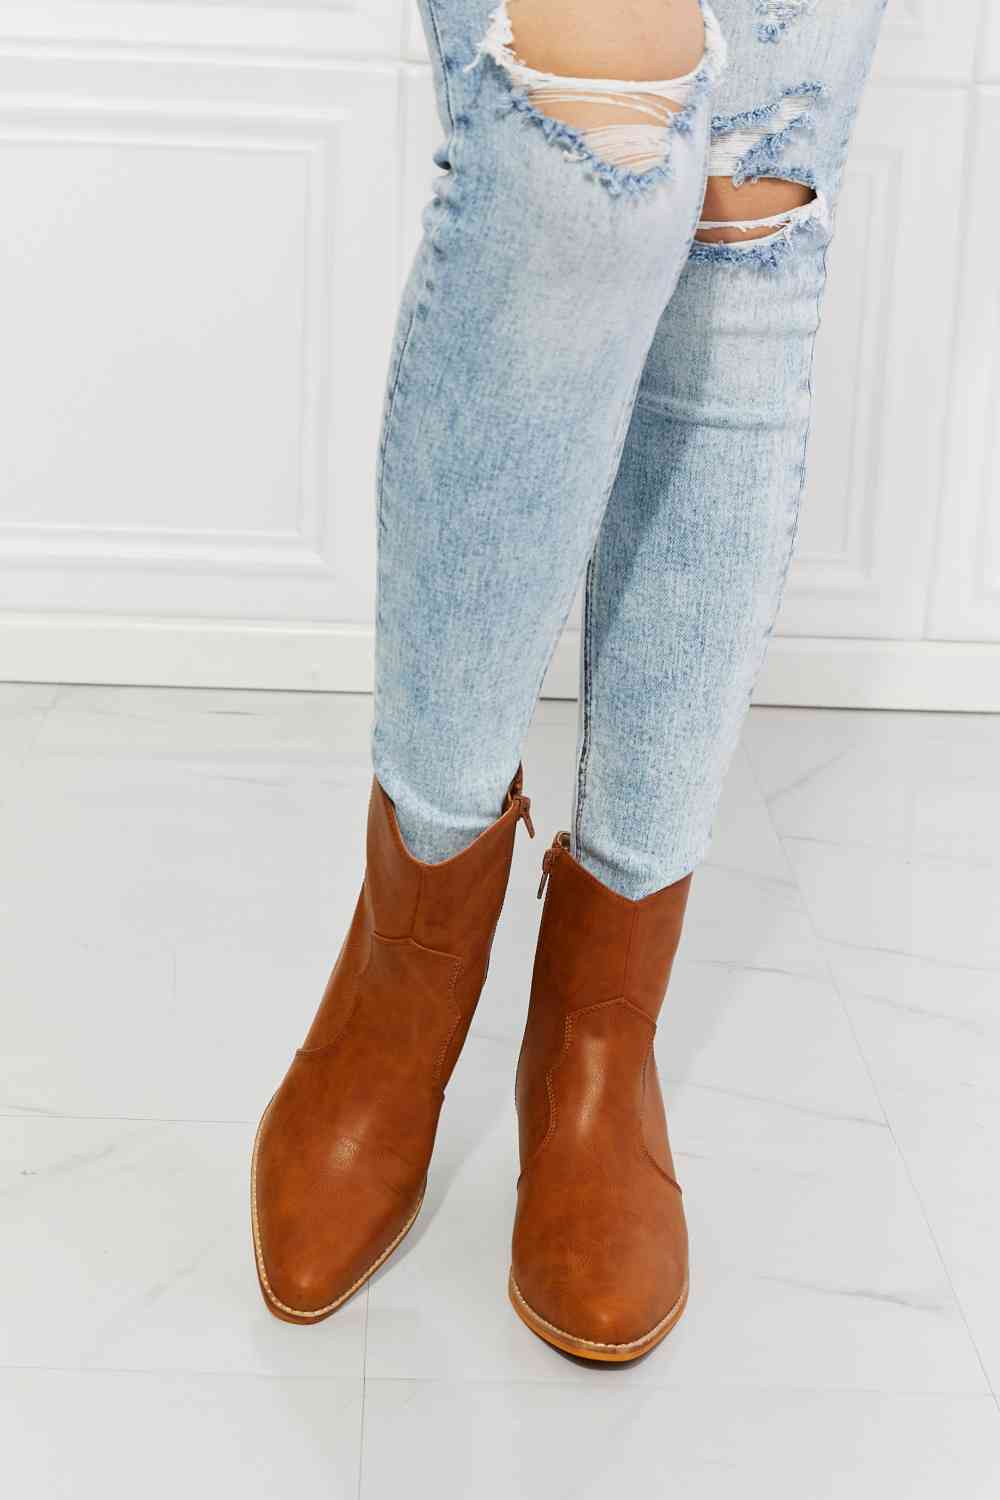 MMShoes Watertower Town Faux Leather Western Ankle Boots in Ochre - Alonna's Legging Land